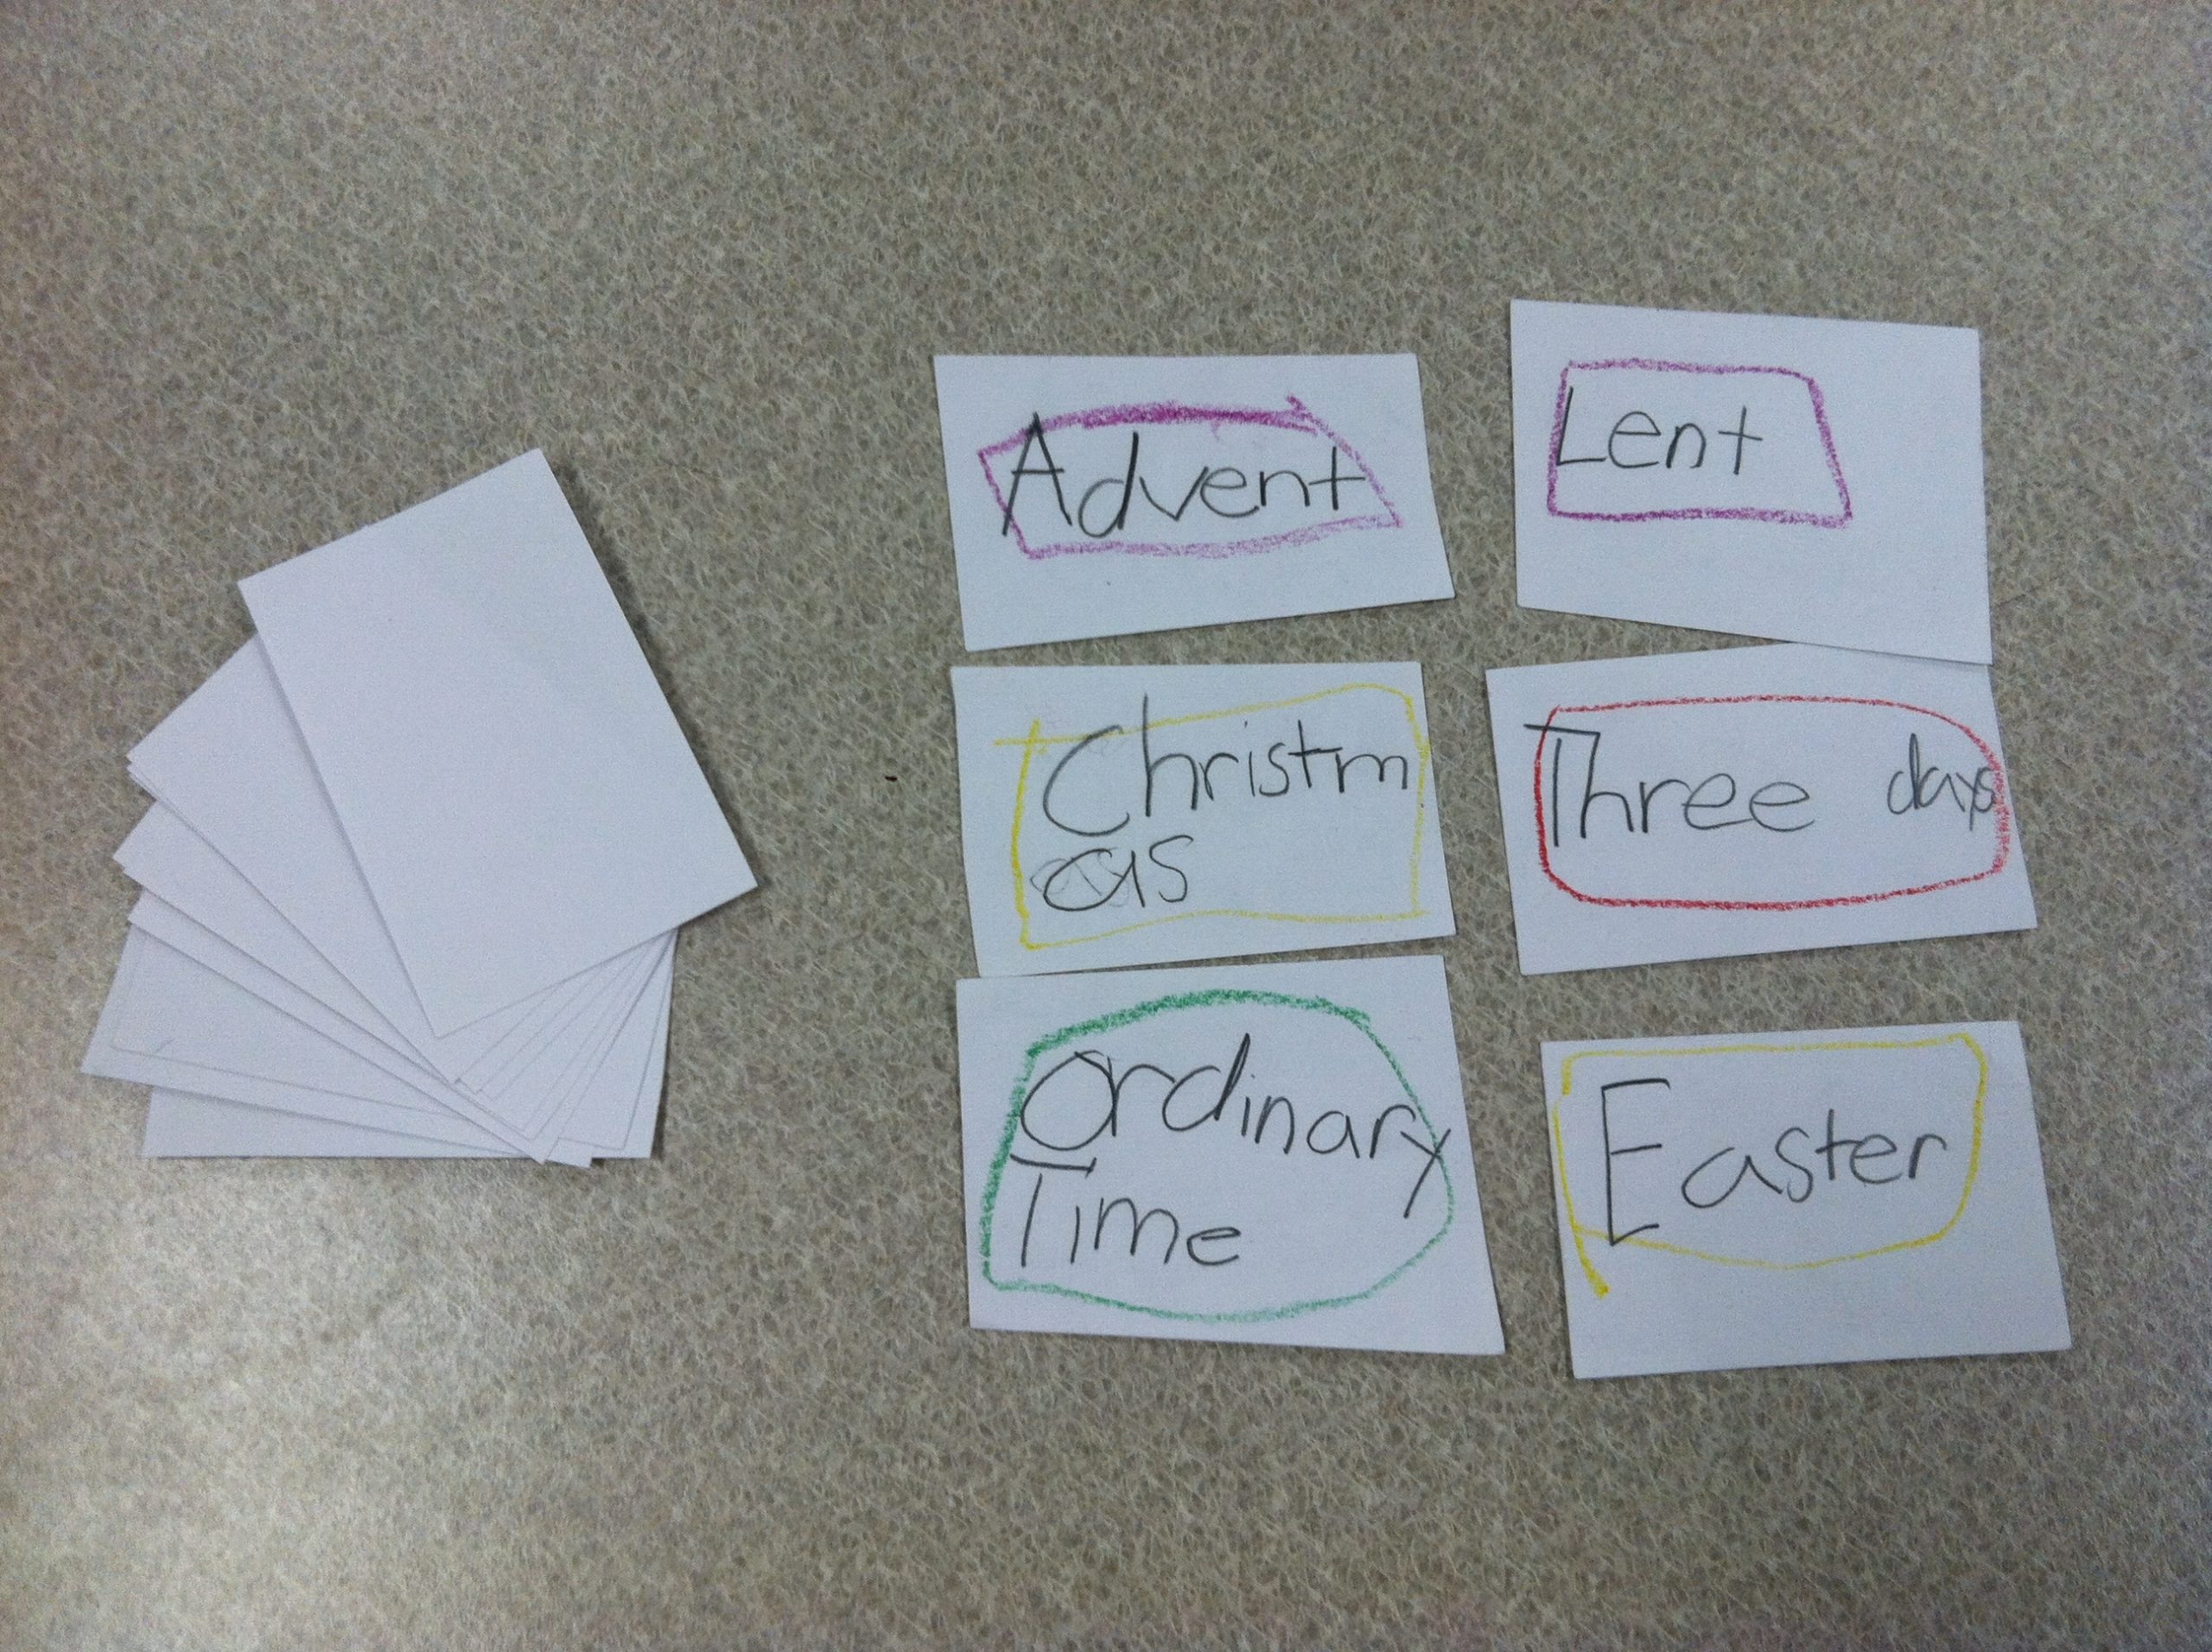 Liturgical Year Lesson Plan And Flashcard Activity | The